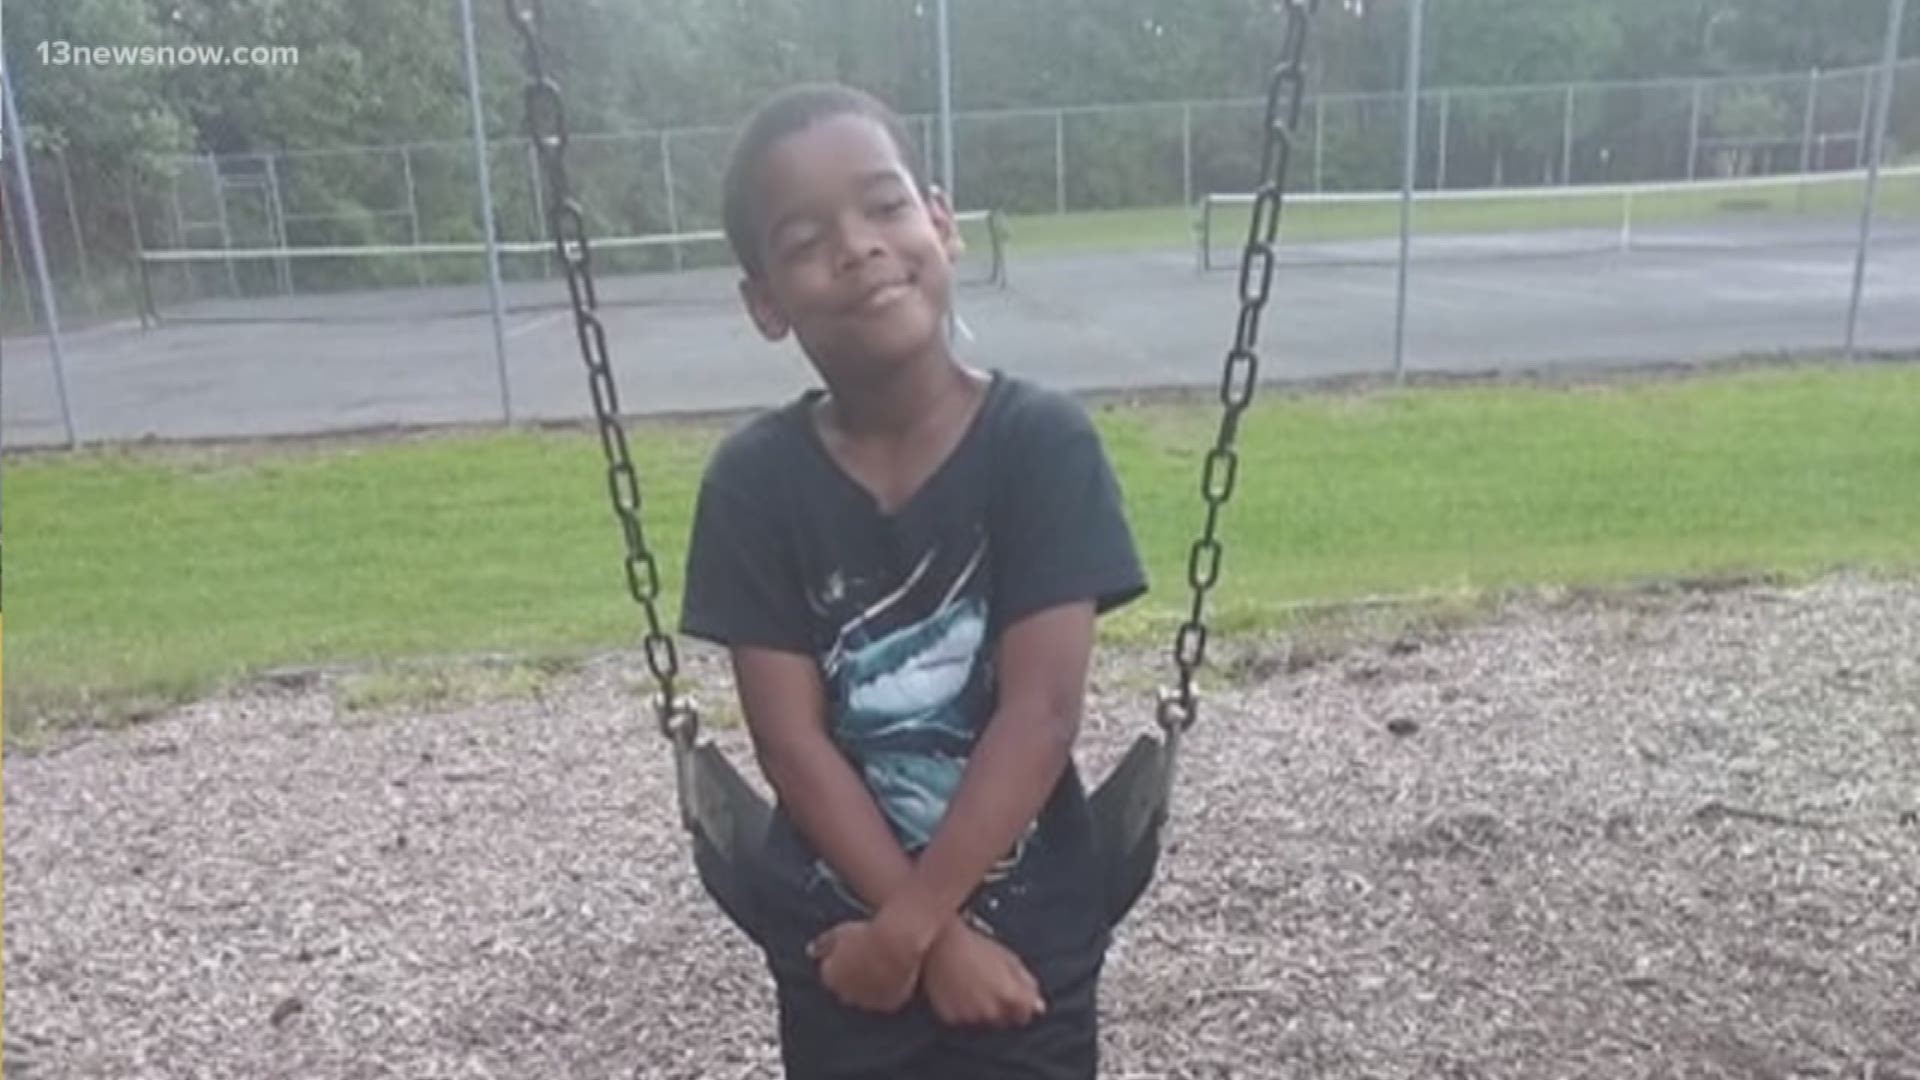 The seven-year-old that was shot was celebrating her birthday. The 12-year-old is fighting for his life in the hospital.